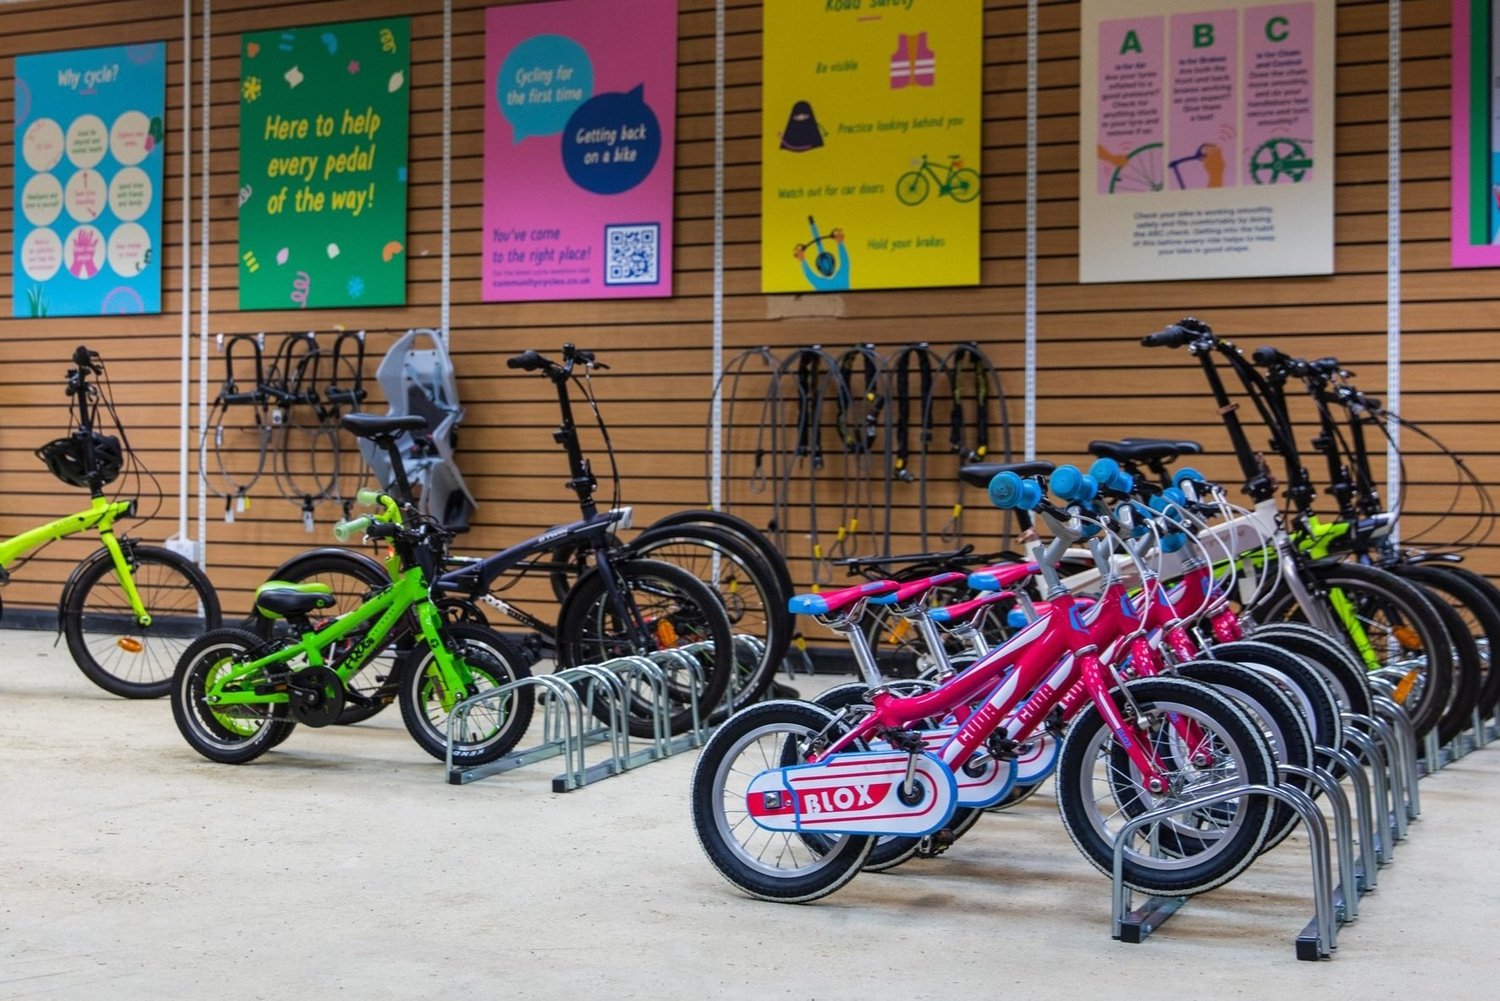 Discover the best bike shops in Canary Wharf! From top-notch repairs to custom bikes and quality gear, explore our guide to find the perfect cycling solutions in this vibrant London district.